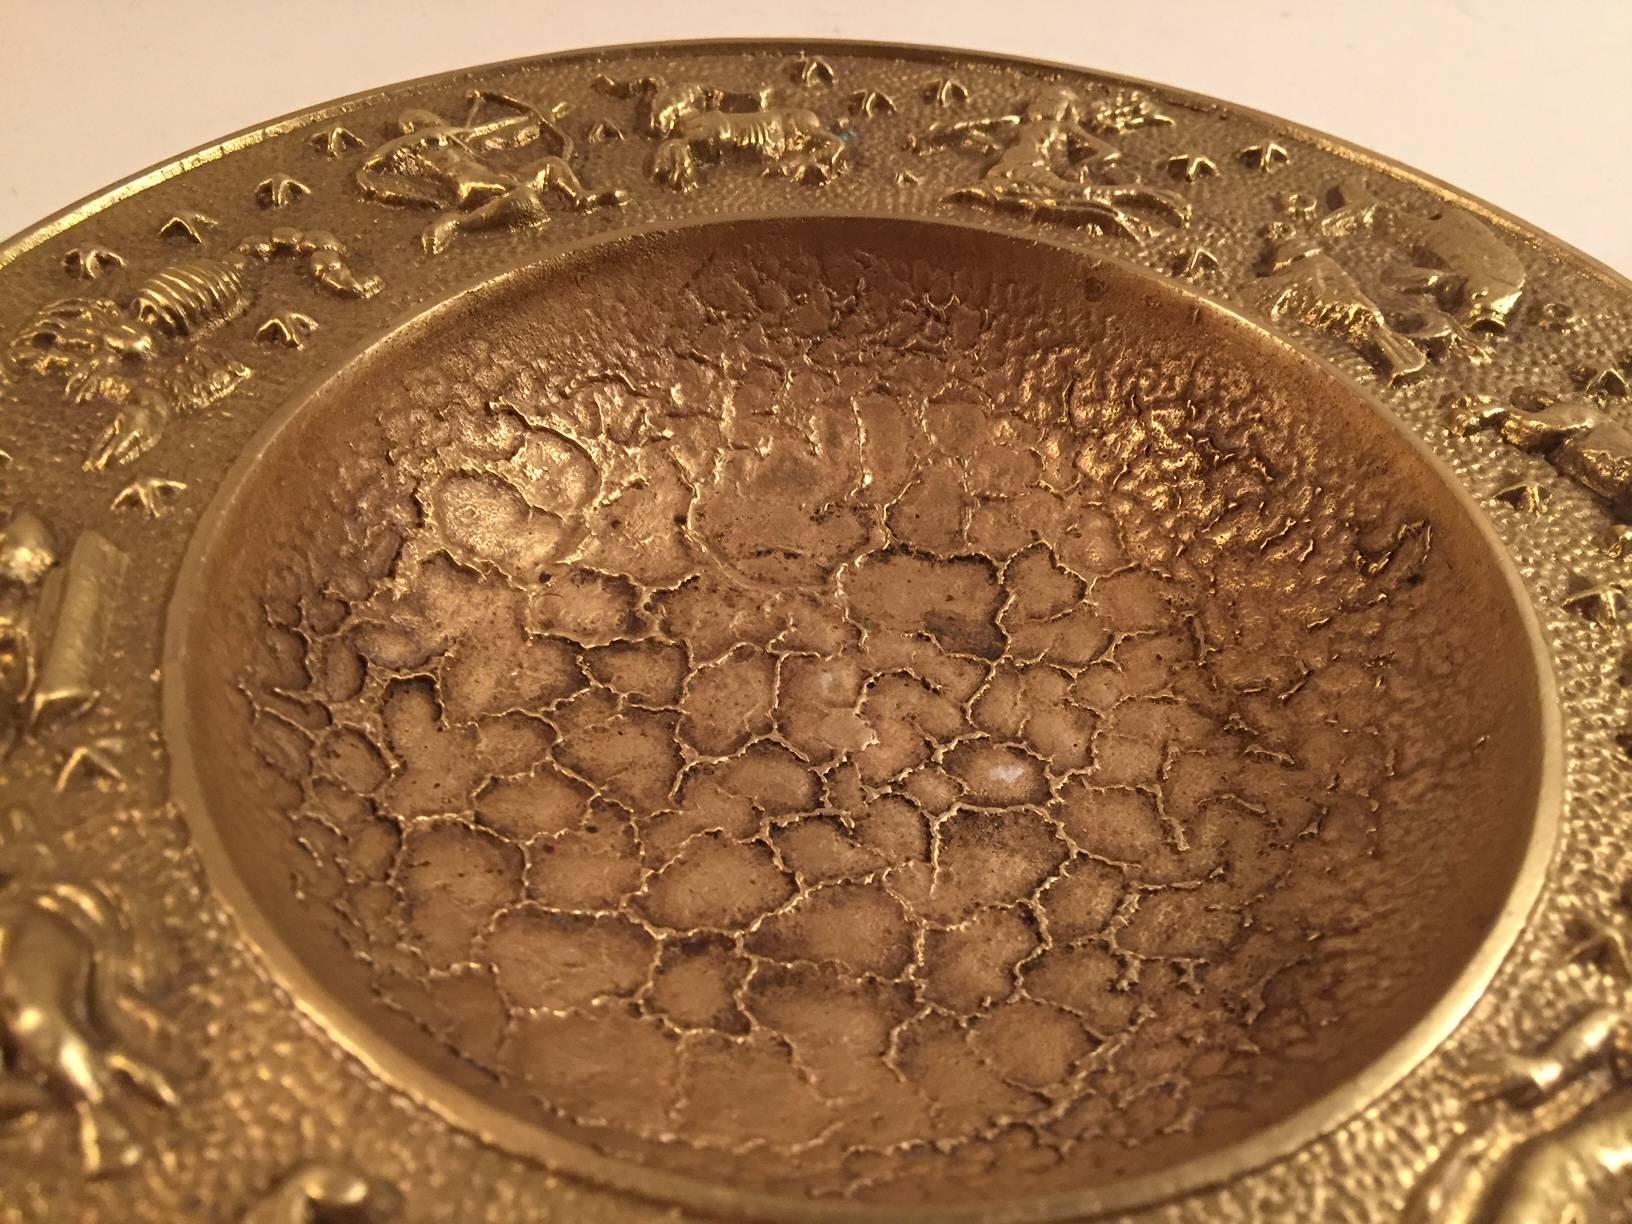 Decorative and heavy bronze bowl with zodiac motifs /signs and a surface that mimics the surface of the moon. It was manufactured and designed by NM/Nordisk Malm in Denmark during the late 1940s. Stylistically it borderlines between Art Deco and